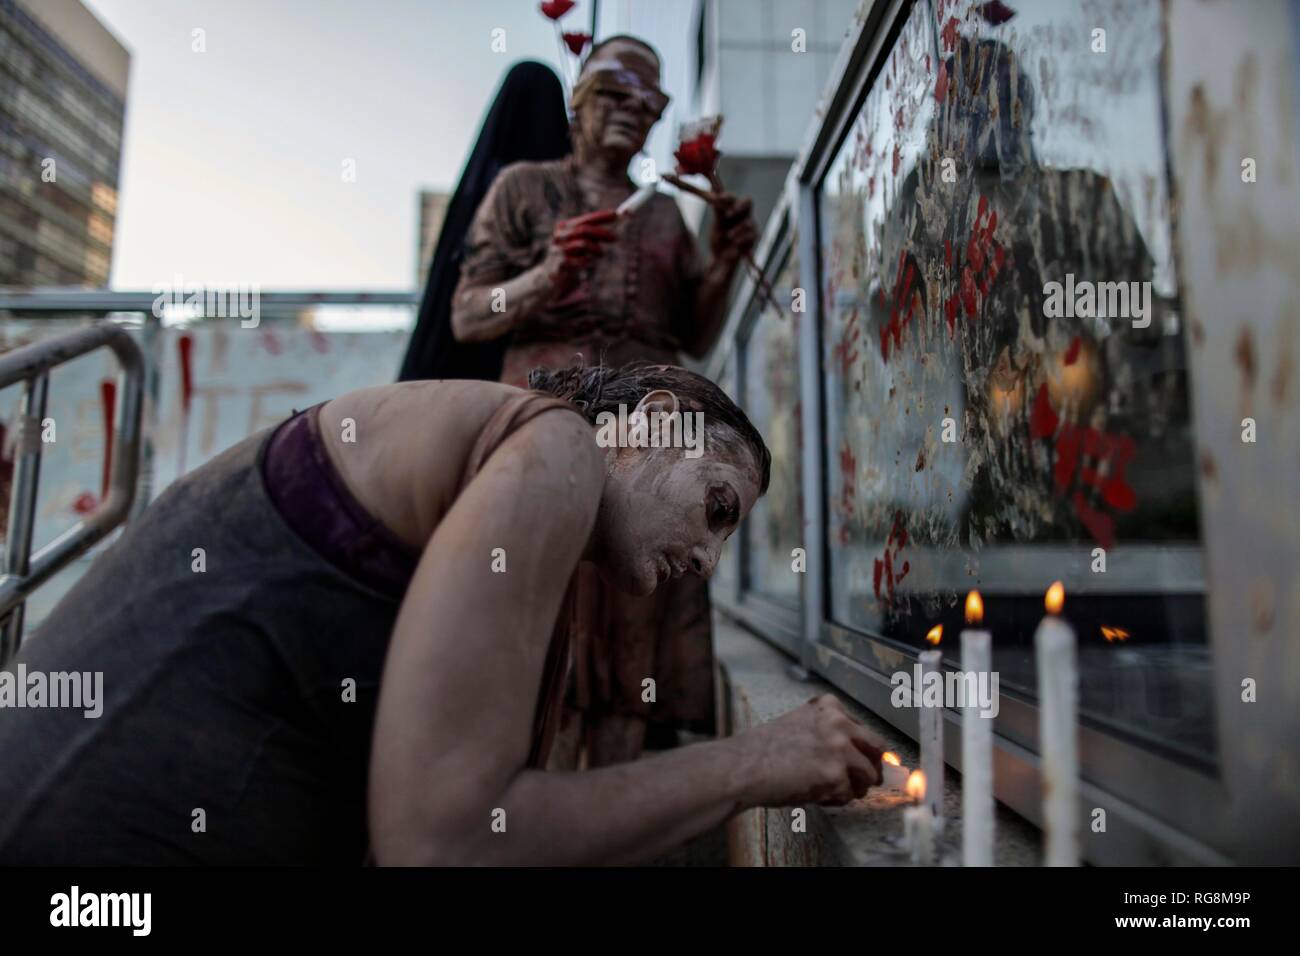 Rio de Janeiro - 01/28/2019 - Manifestacao Ocupa Vale - Demonstrators with mud-covered bodies light candles in memory of victims during protest against mining company Vale in front of its headquarters in the south zone of the city. On January 25, the Feijinha Mine dam, operated by the mining company Vale, located in the city of Brumadinho in the state of Minas Gerais, broke off about 12 million meters of tailings in the region. Photo: Alex Ribeiro / AGIF Stock Photo